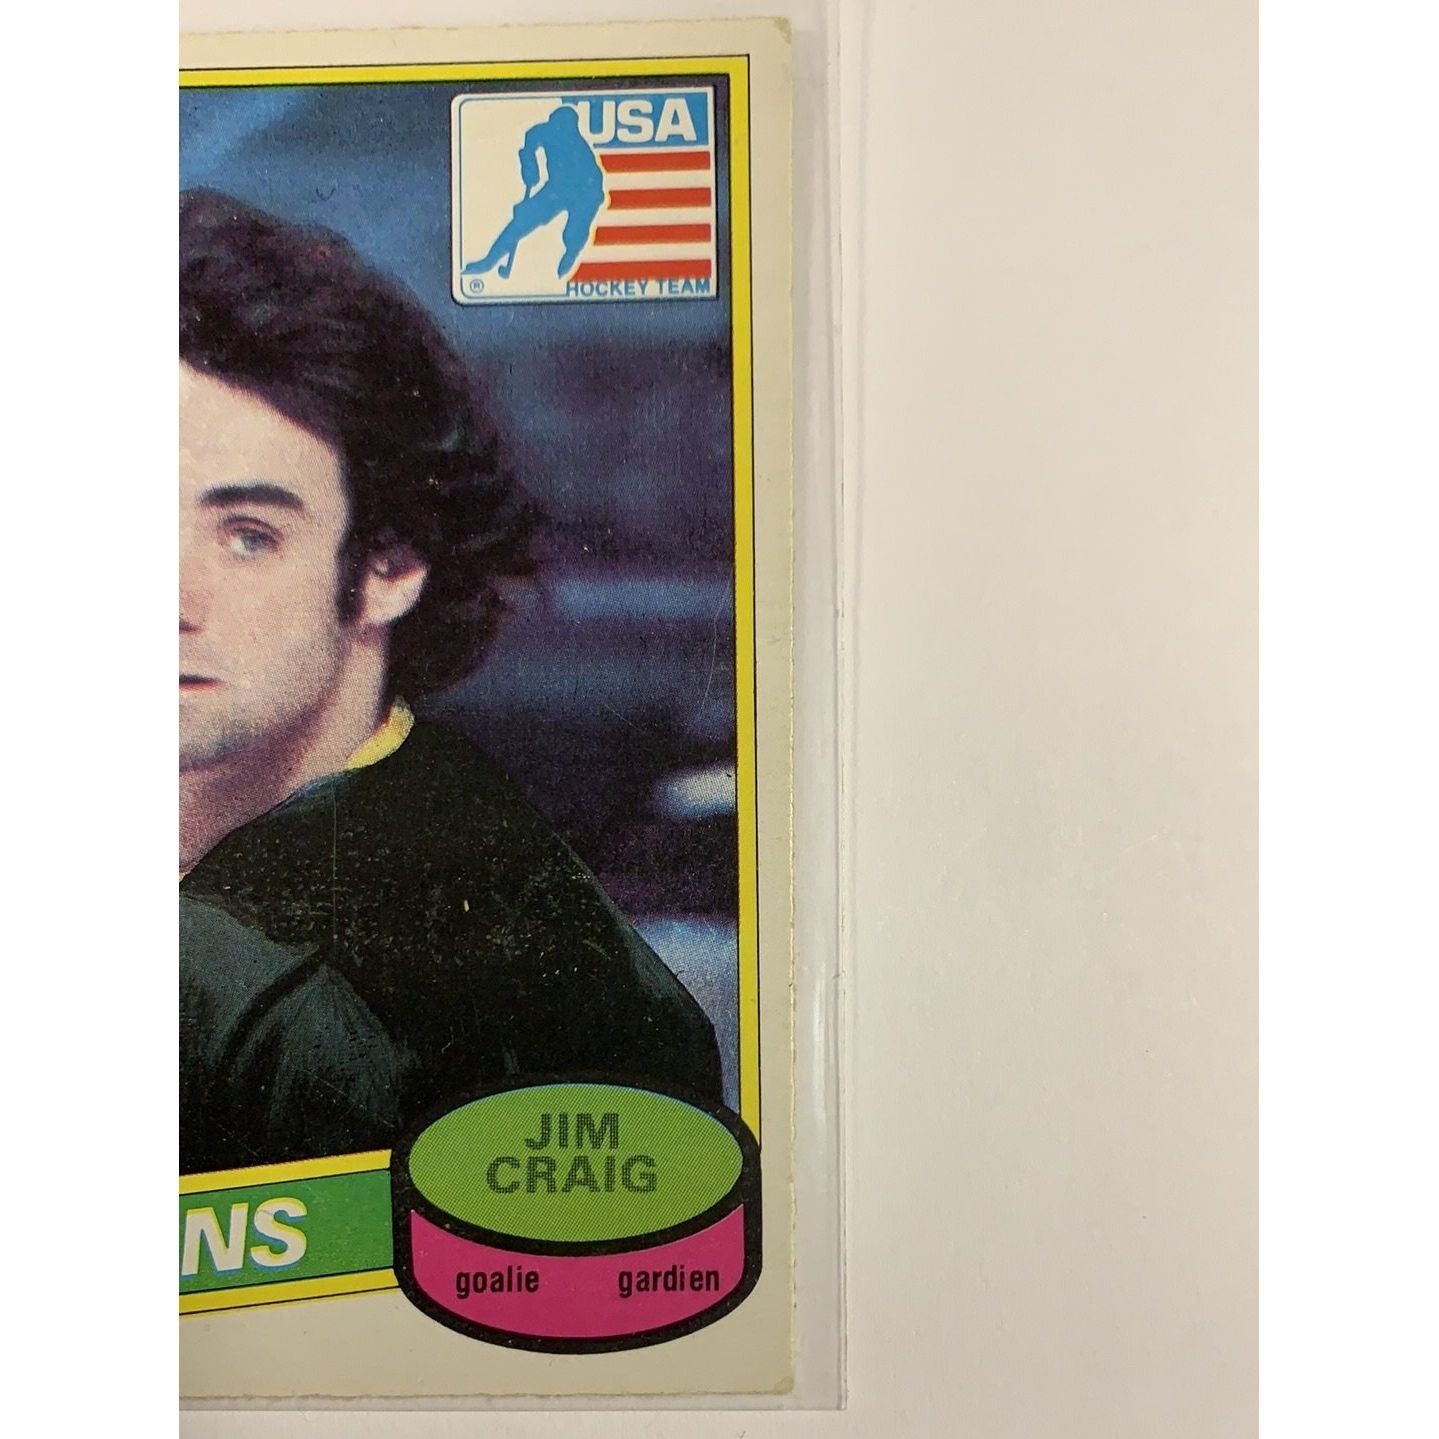  1980-81 O-Pee-Chee Jim Craig Team USA Insert  Local Legends Cards & Collectibles